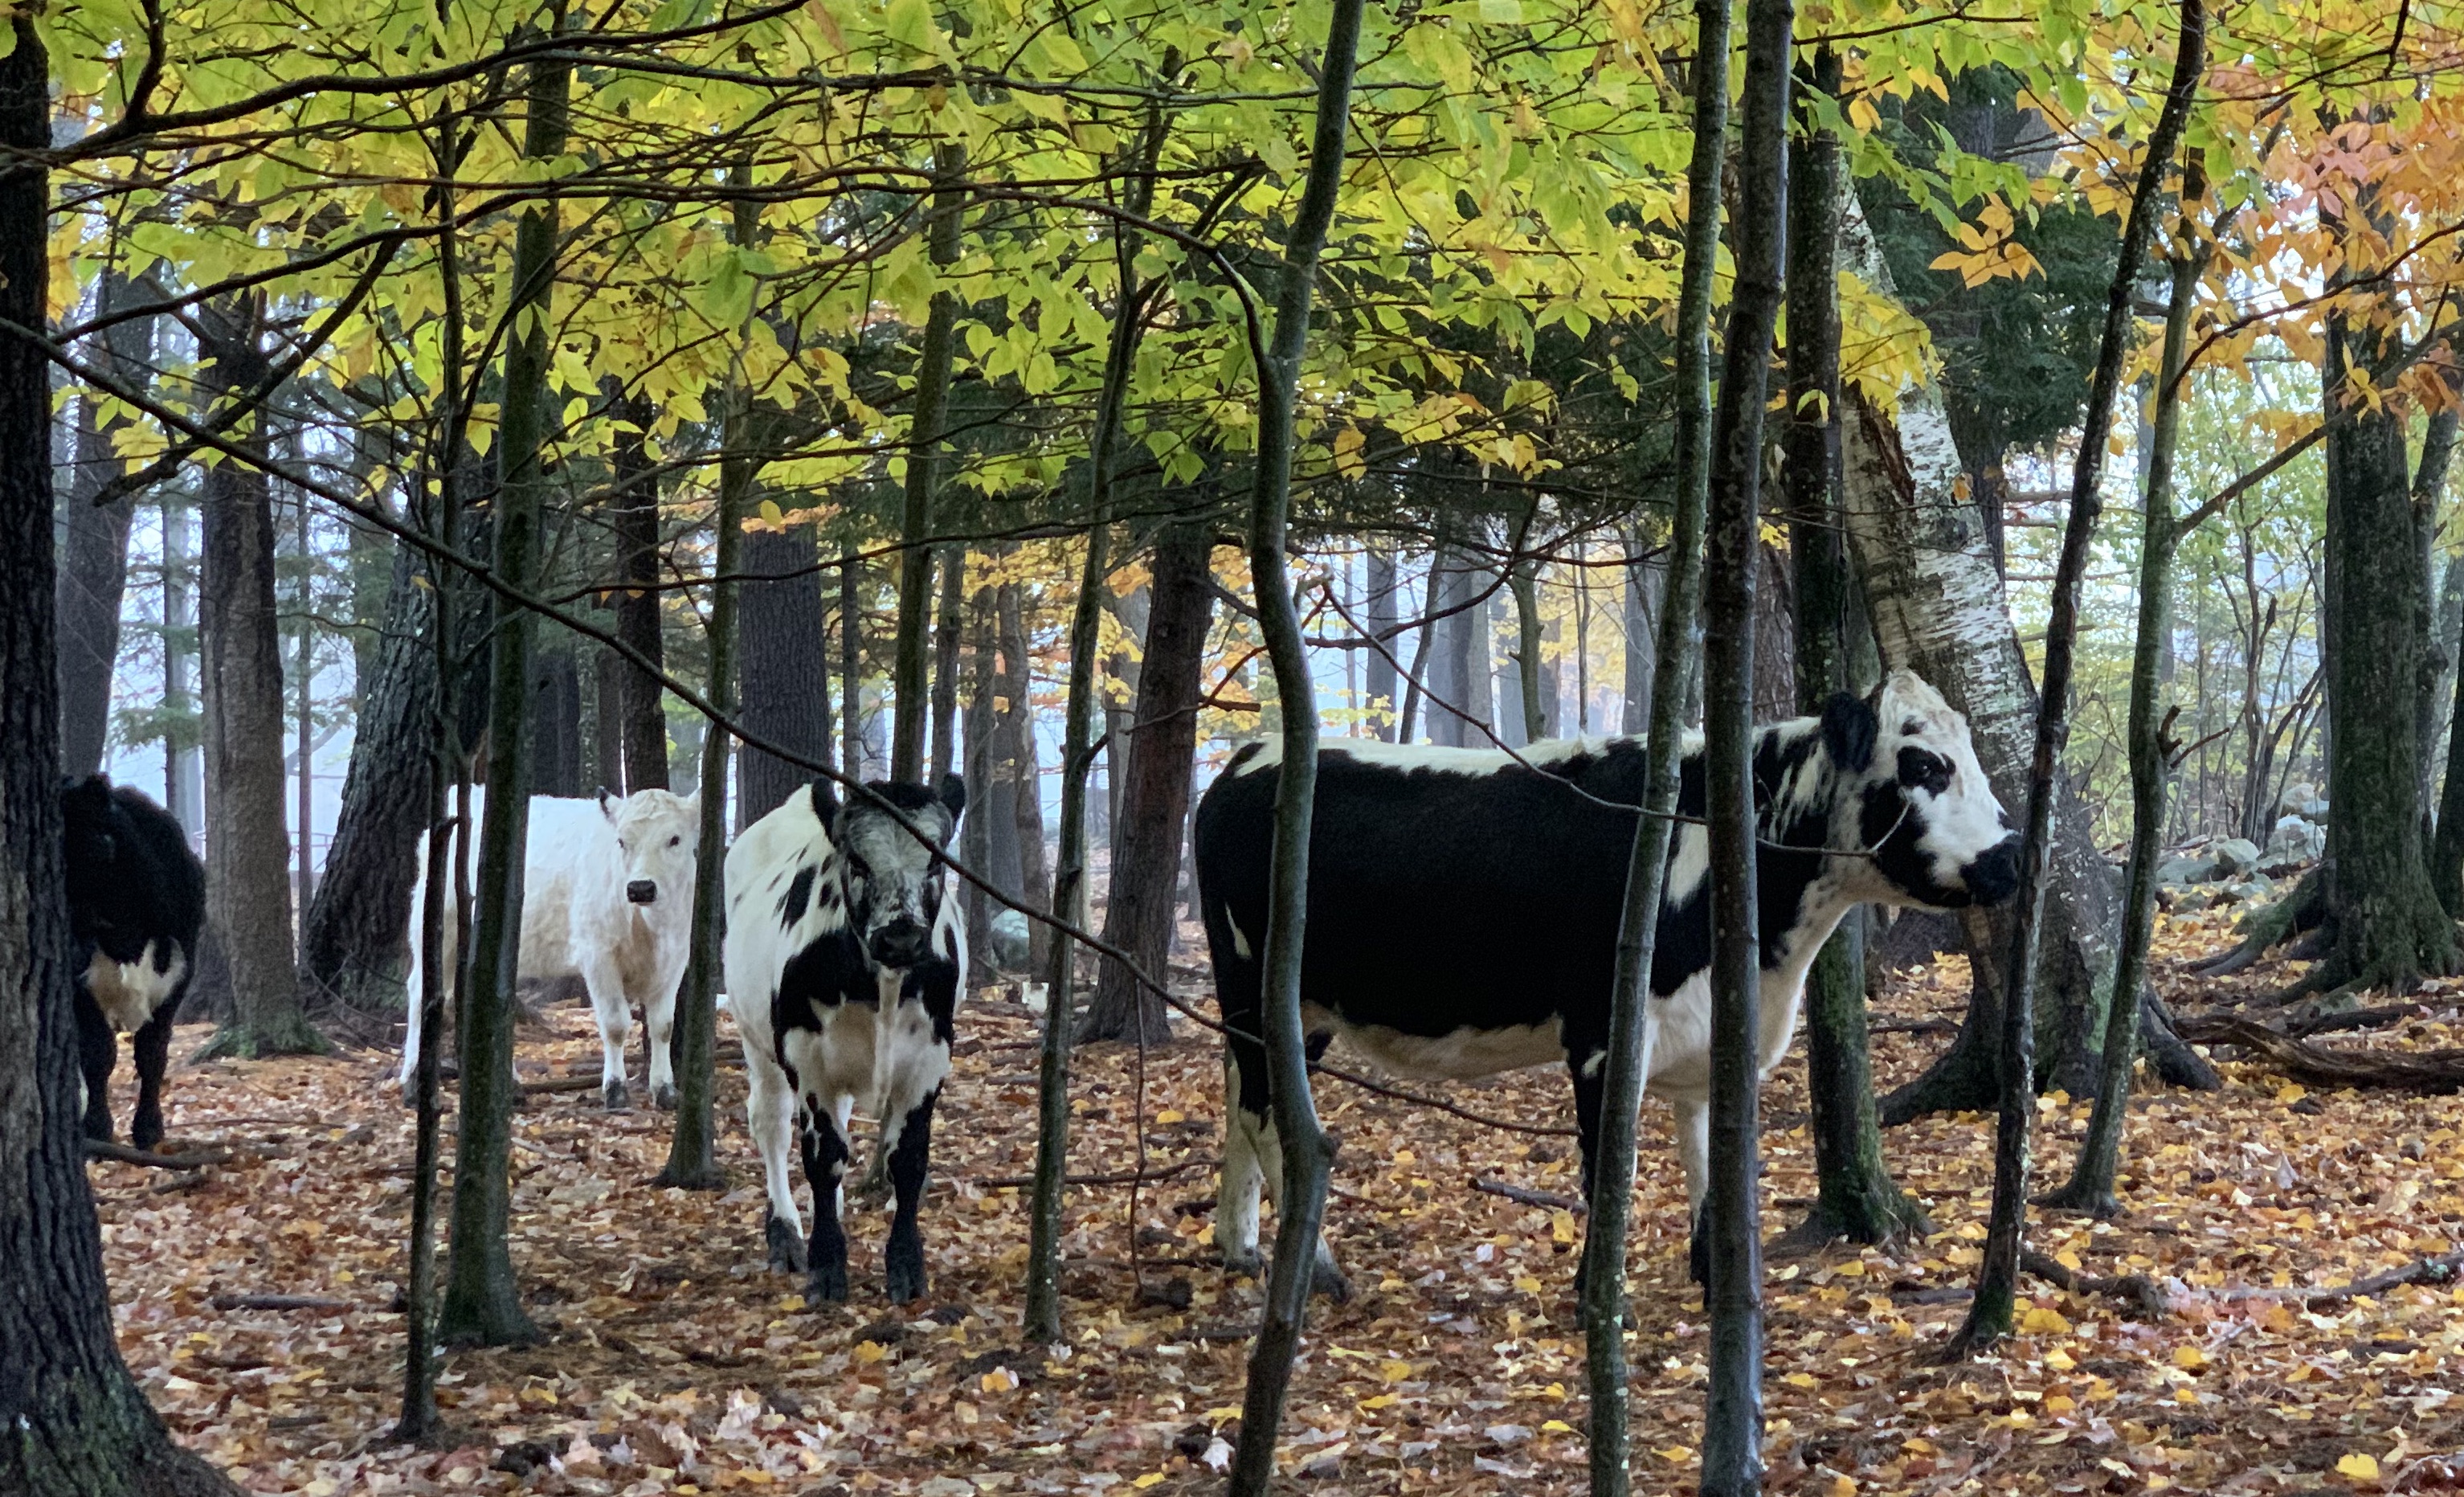 Image Caption: Cows graze in woodlands. Image Credit: The Gentiles